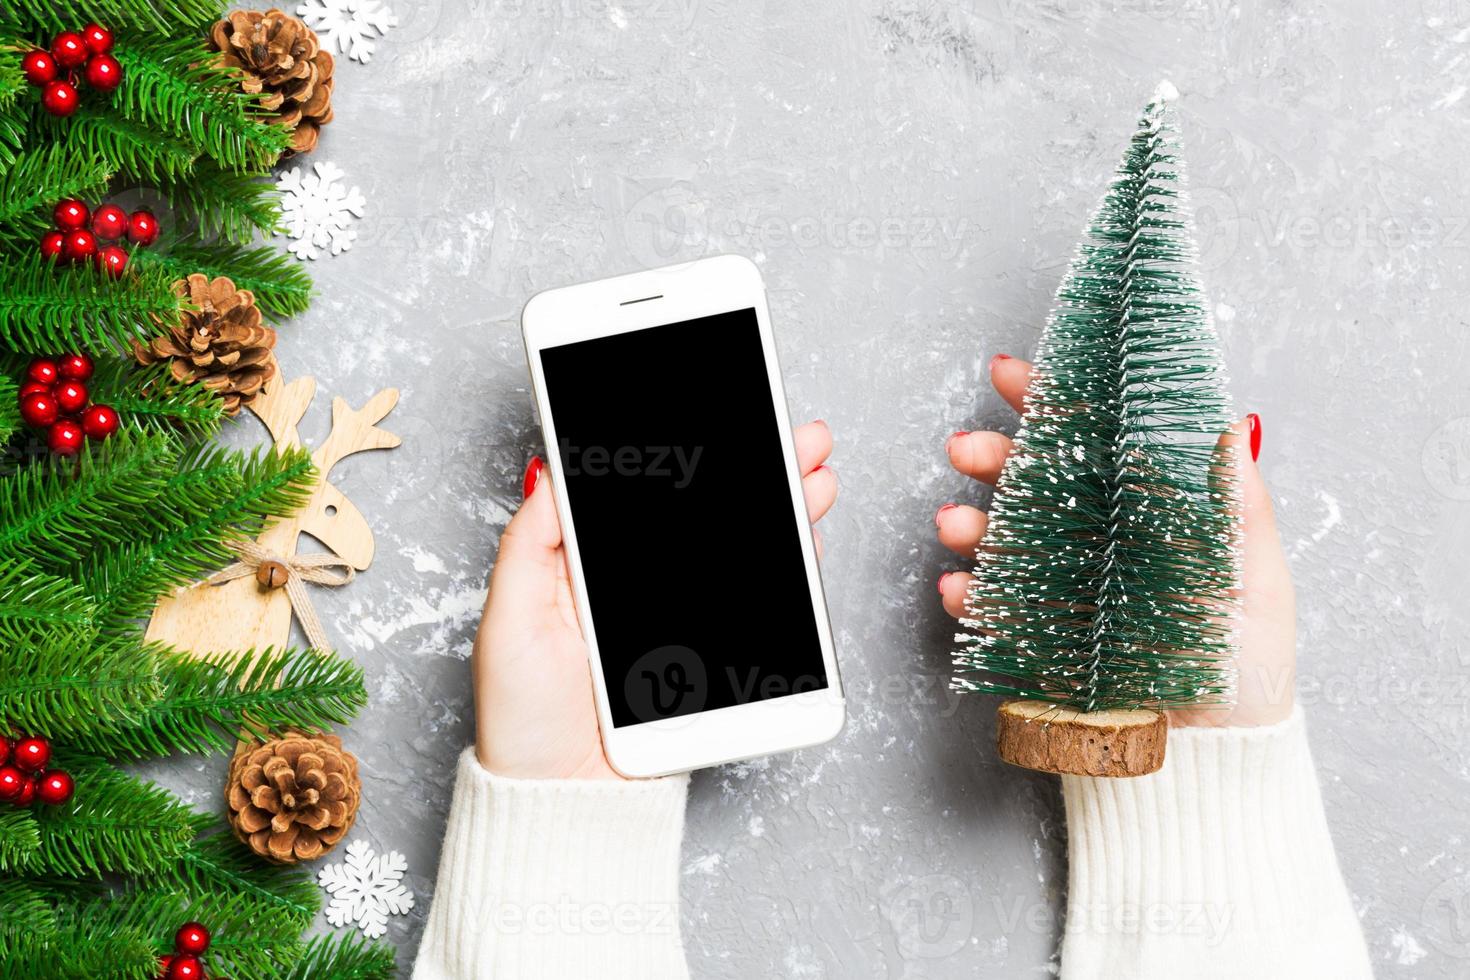 Top view of a woman holding a phone in her hand on cement New Year background made of fir tree and festive decorations. Christmas holiday concept. Mockup photo